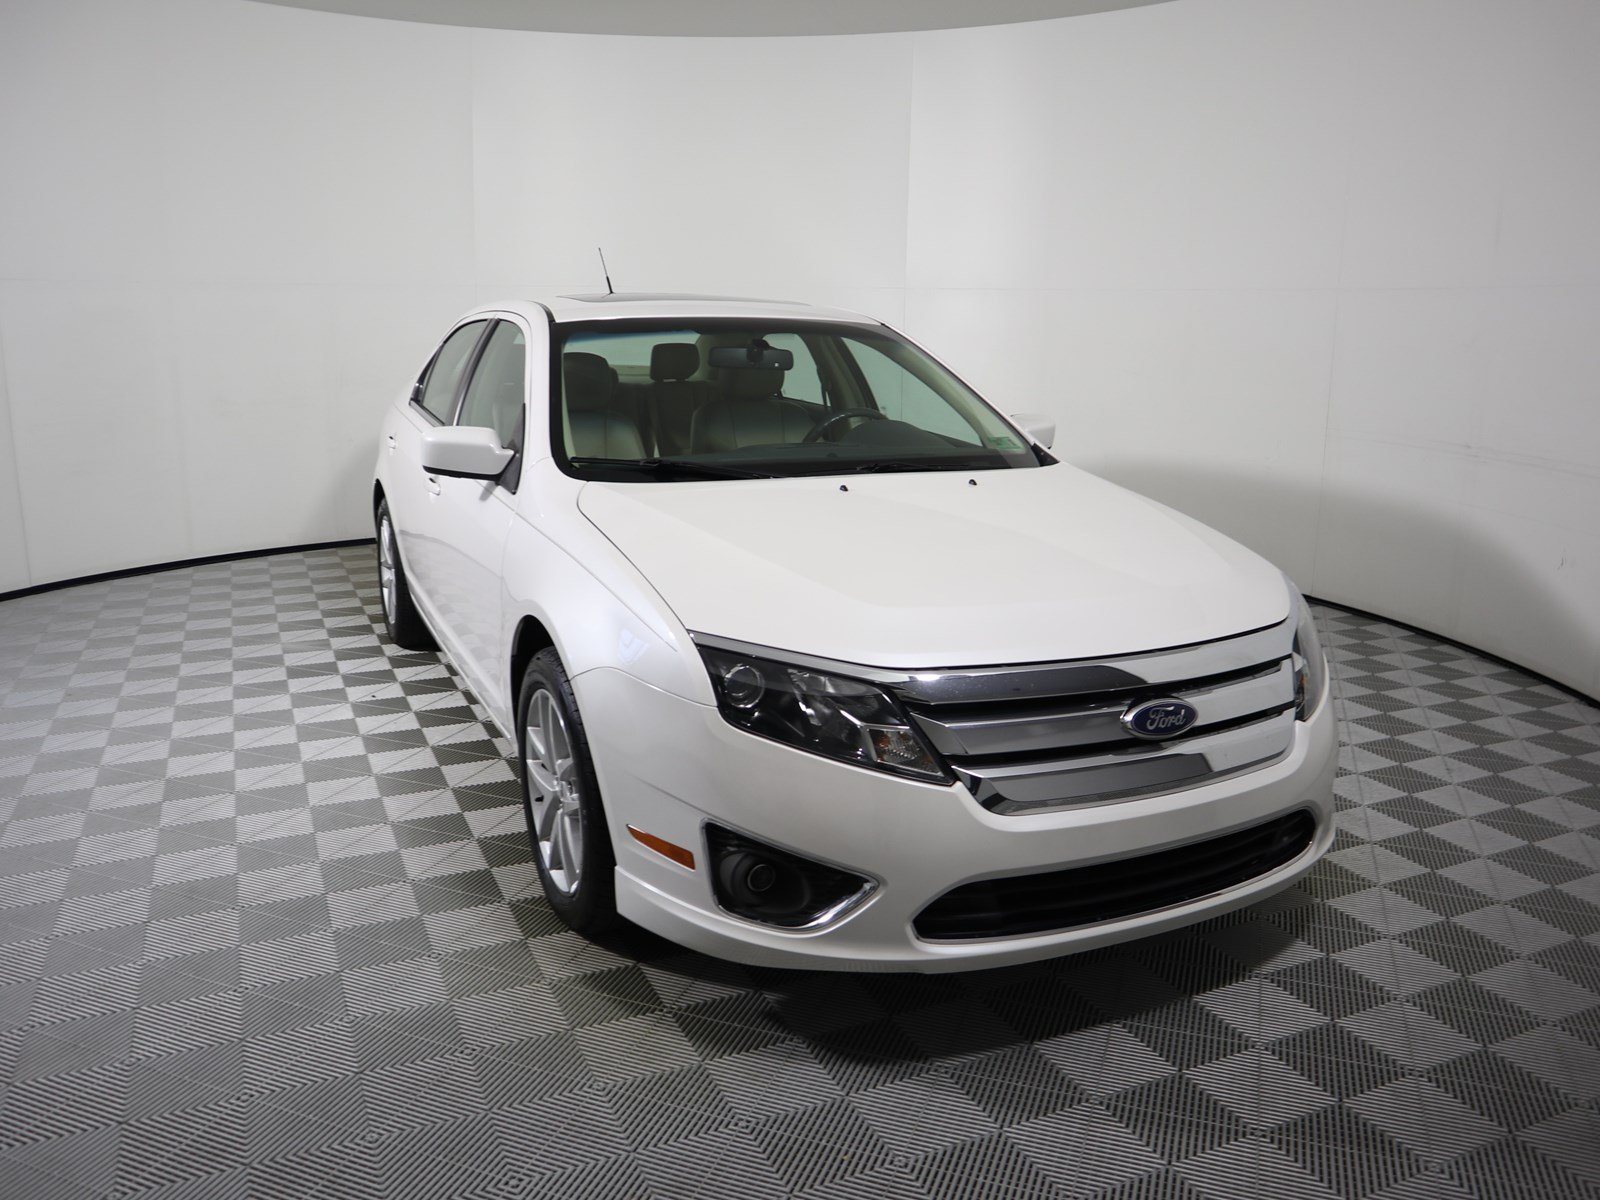 Pre-Owned 2012 Ford Fusion SEL 4dr Car in Parkersburg #FX19715B